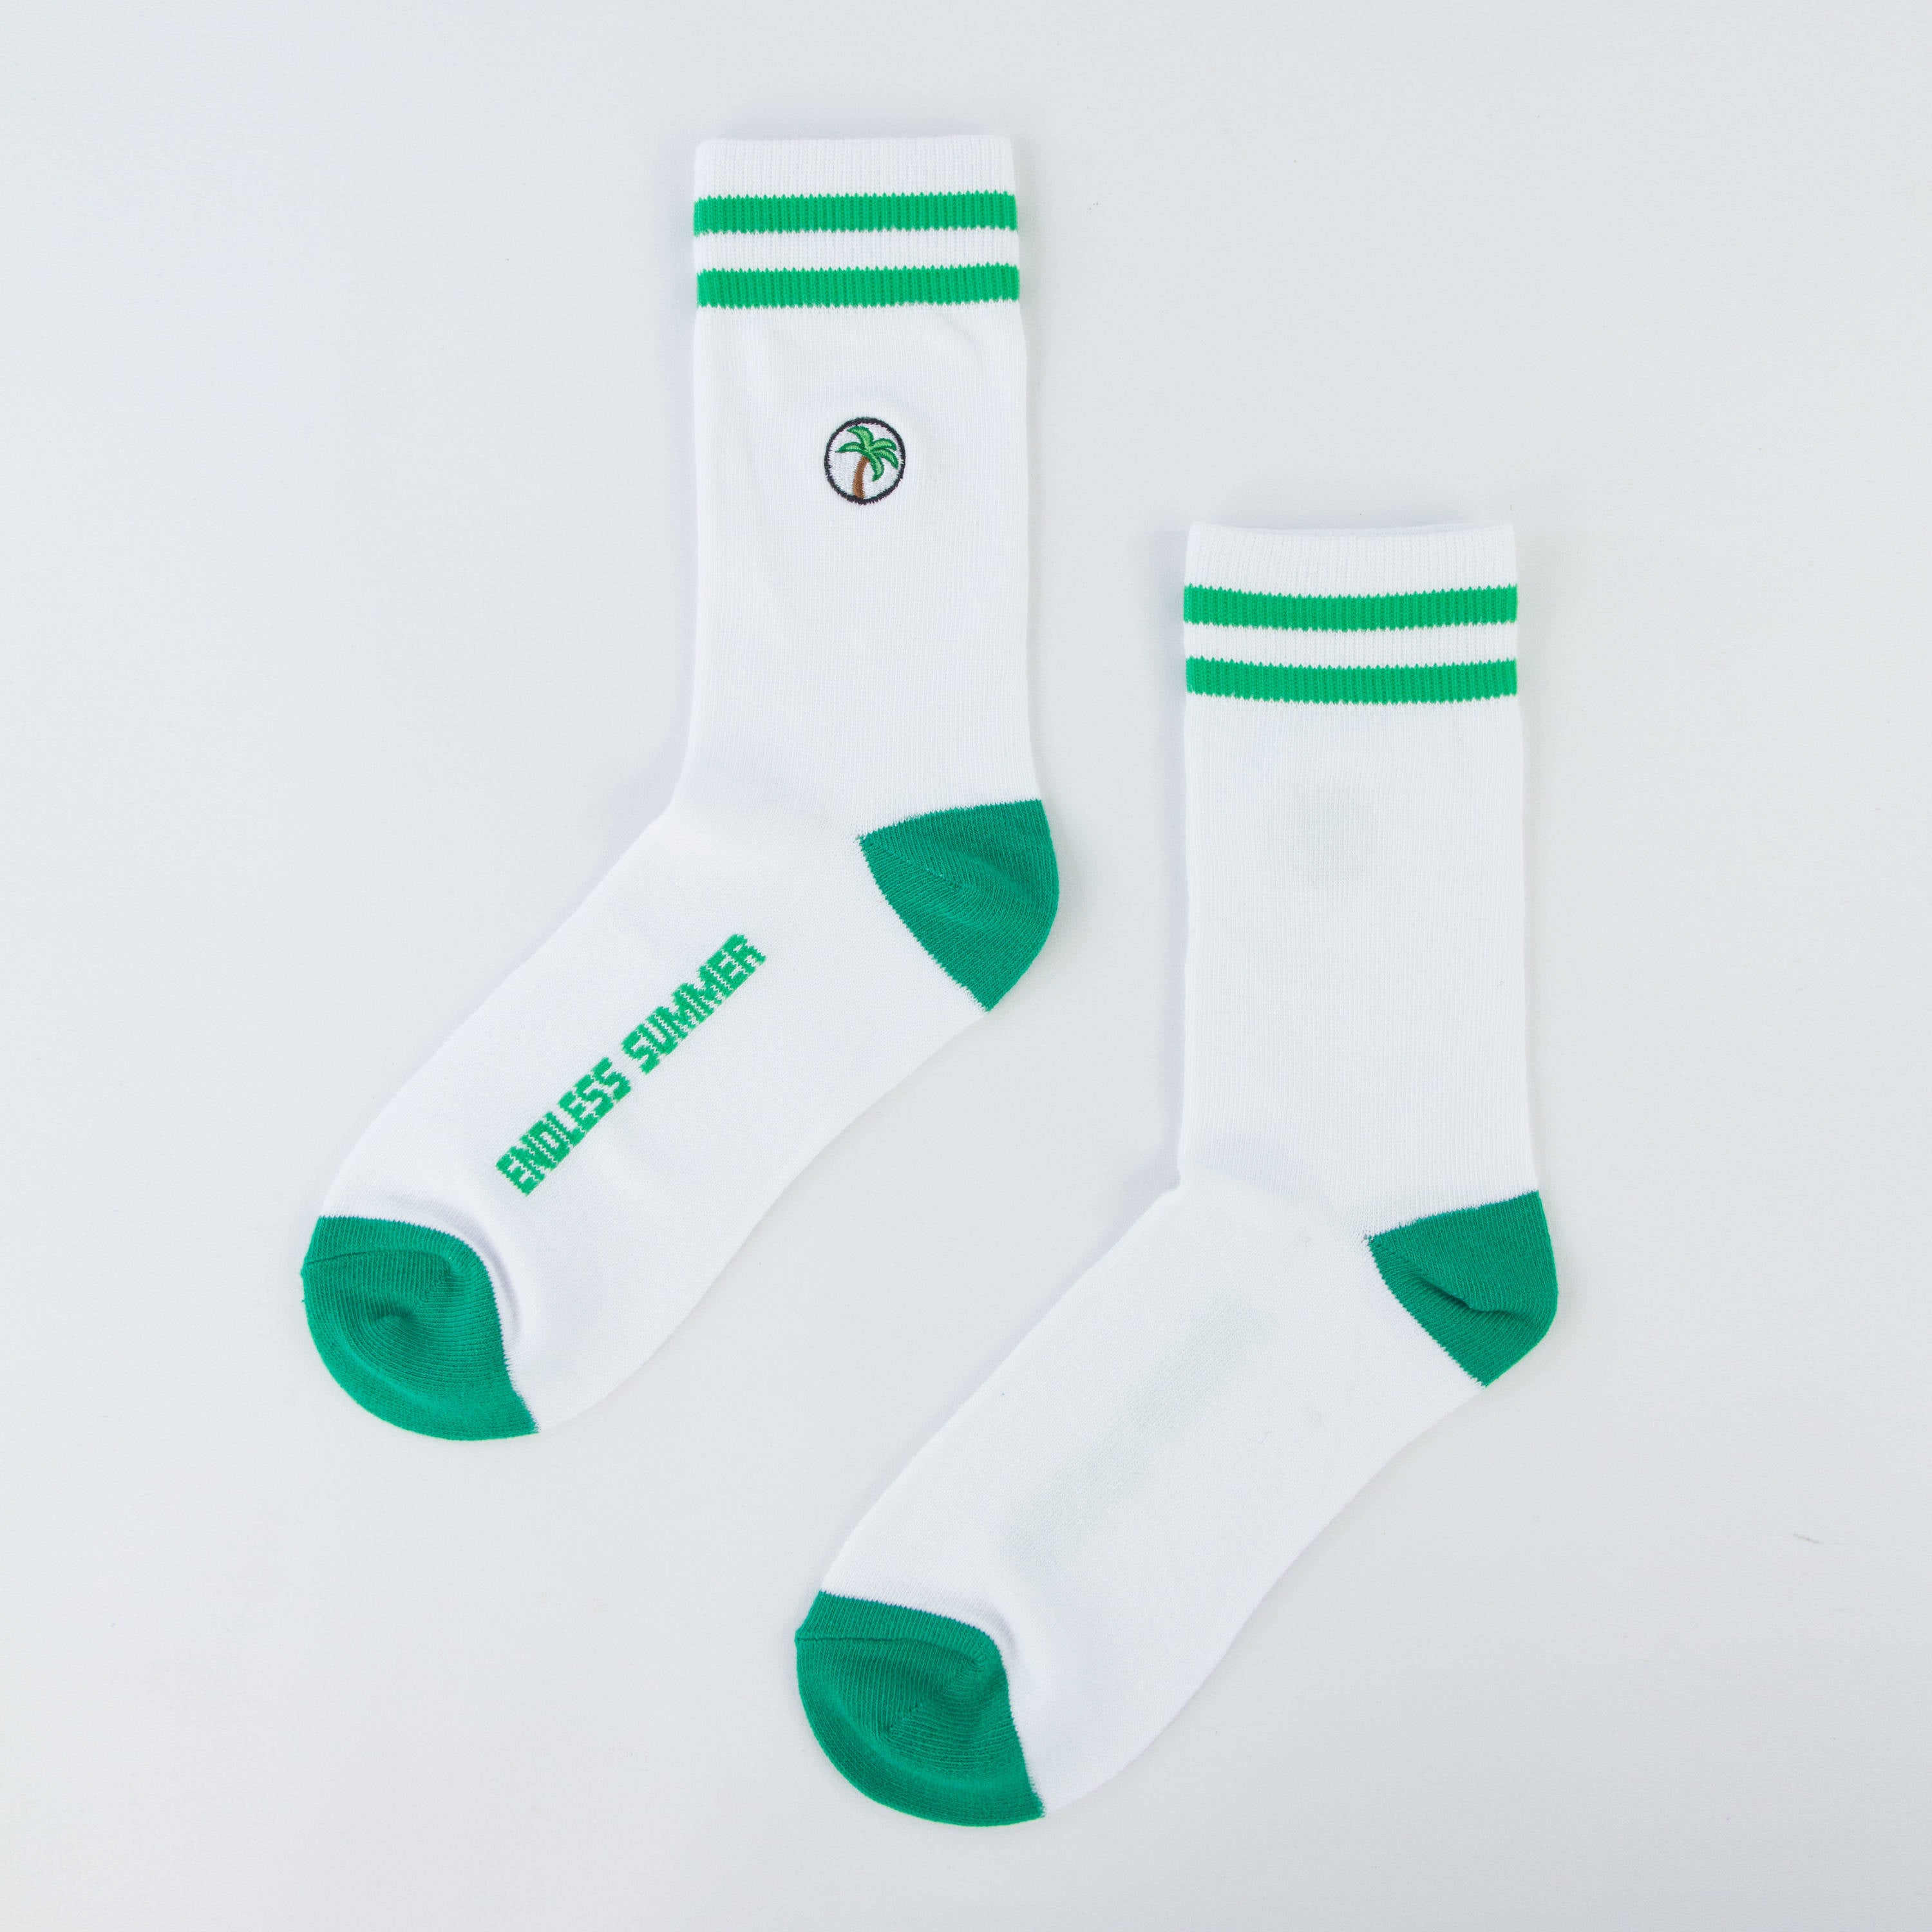 Our premium socks are here!